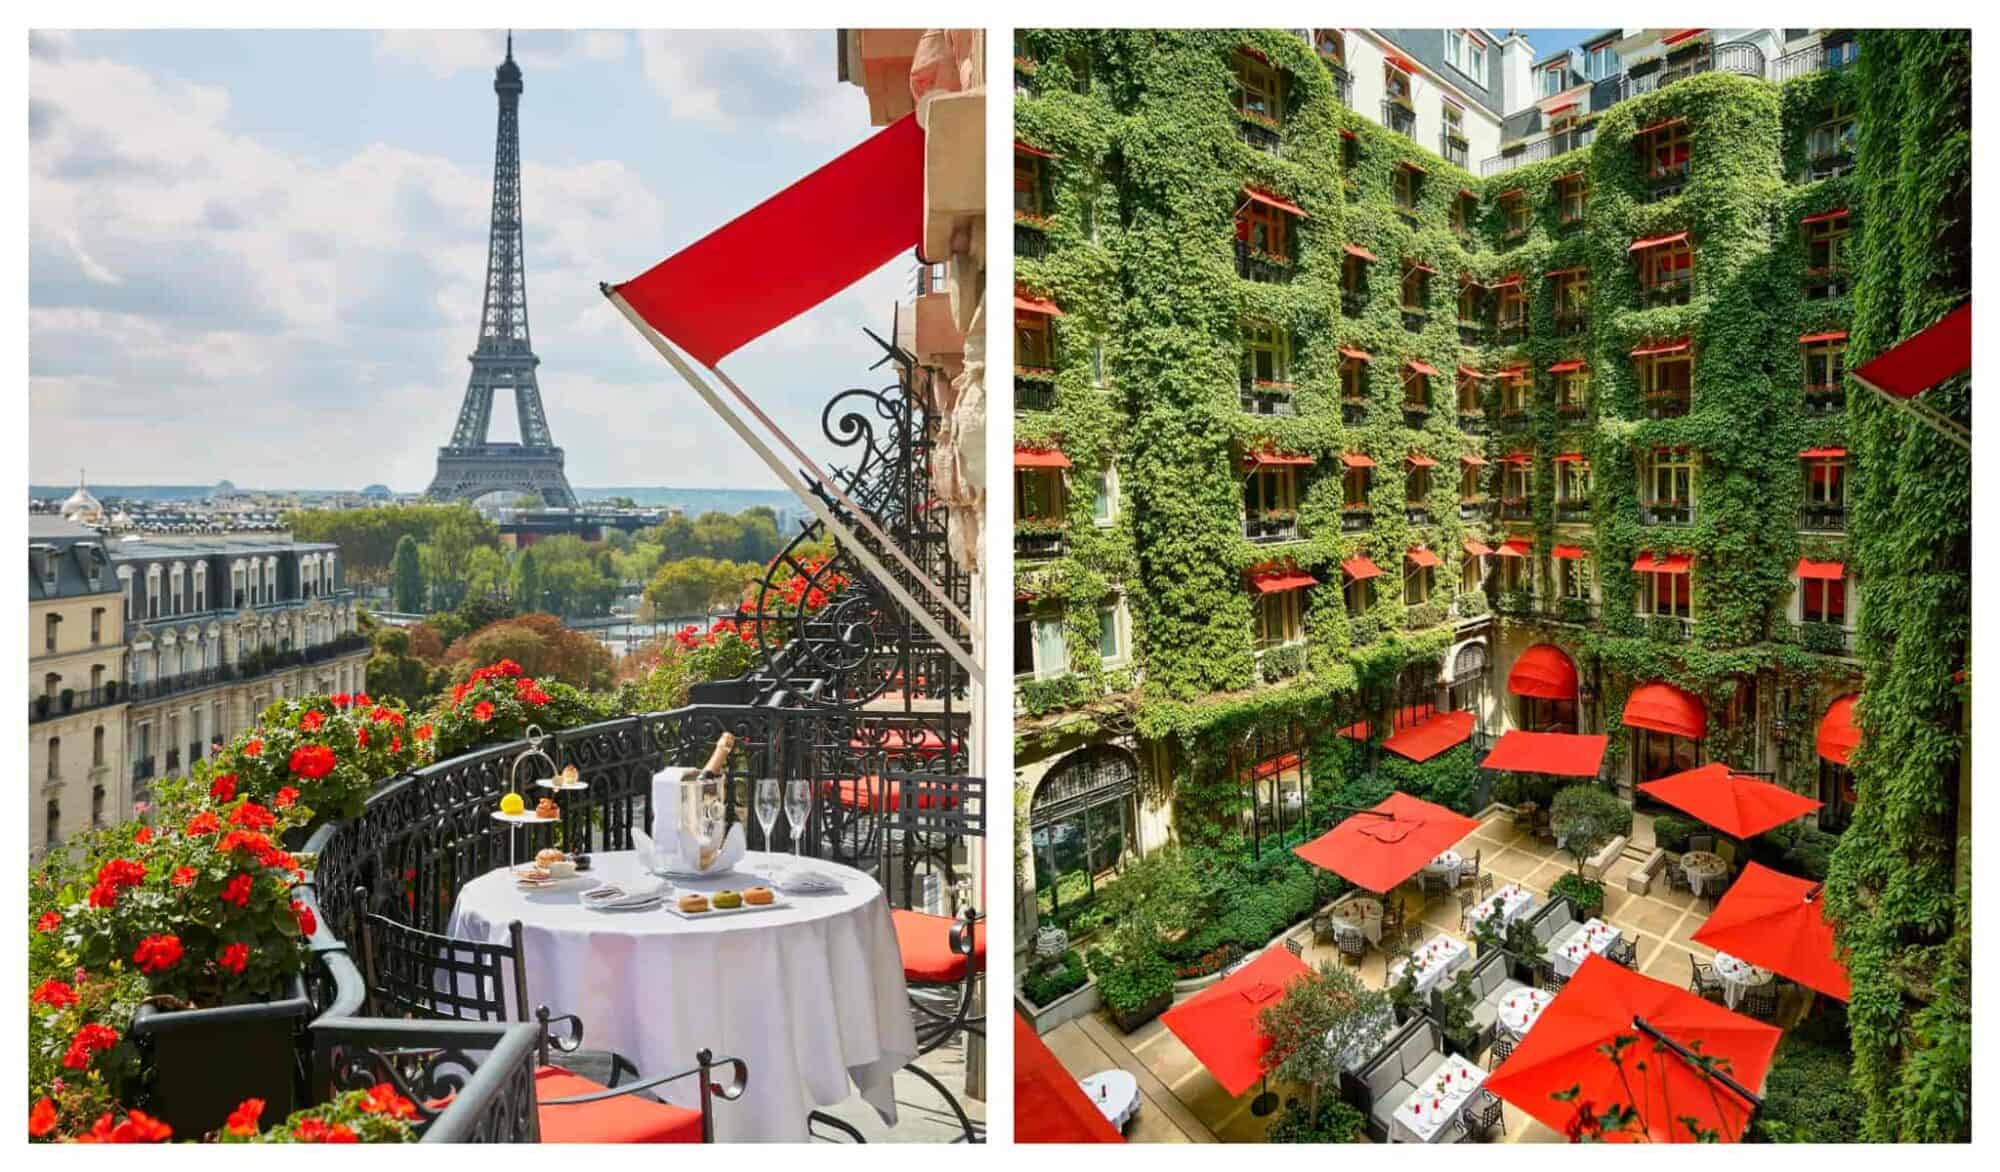 Left: view of the Eiffel Tower from the balcony of Hotel Plaza Athénée, Right: the facades of Hotel Plaza Athénée with the restaurant in the courtyard